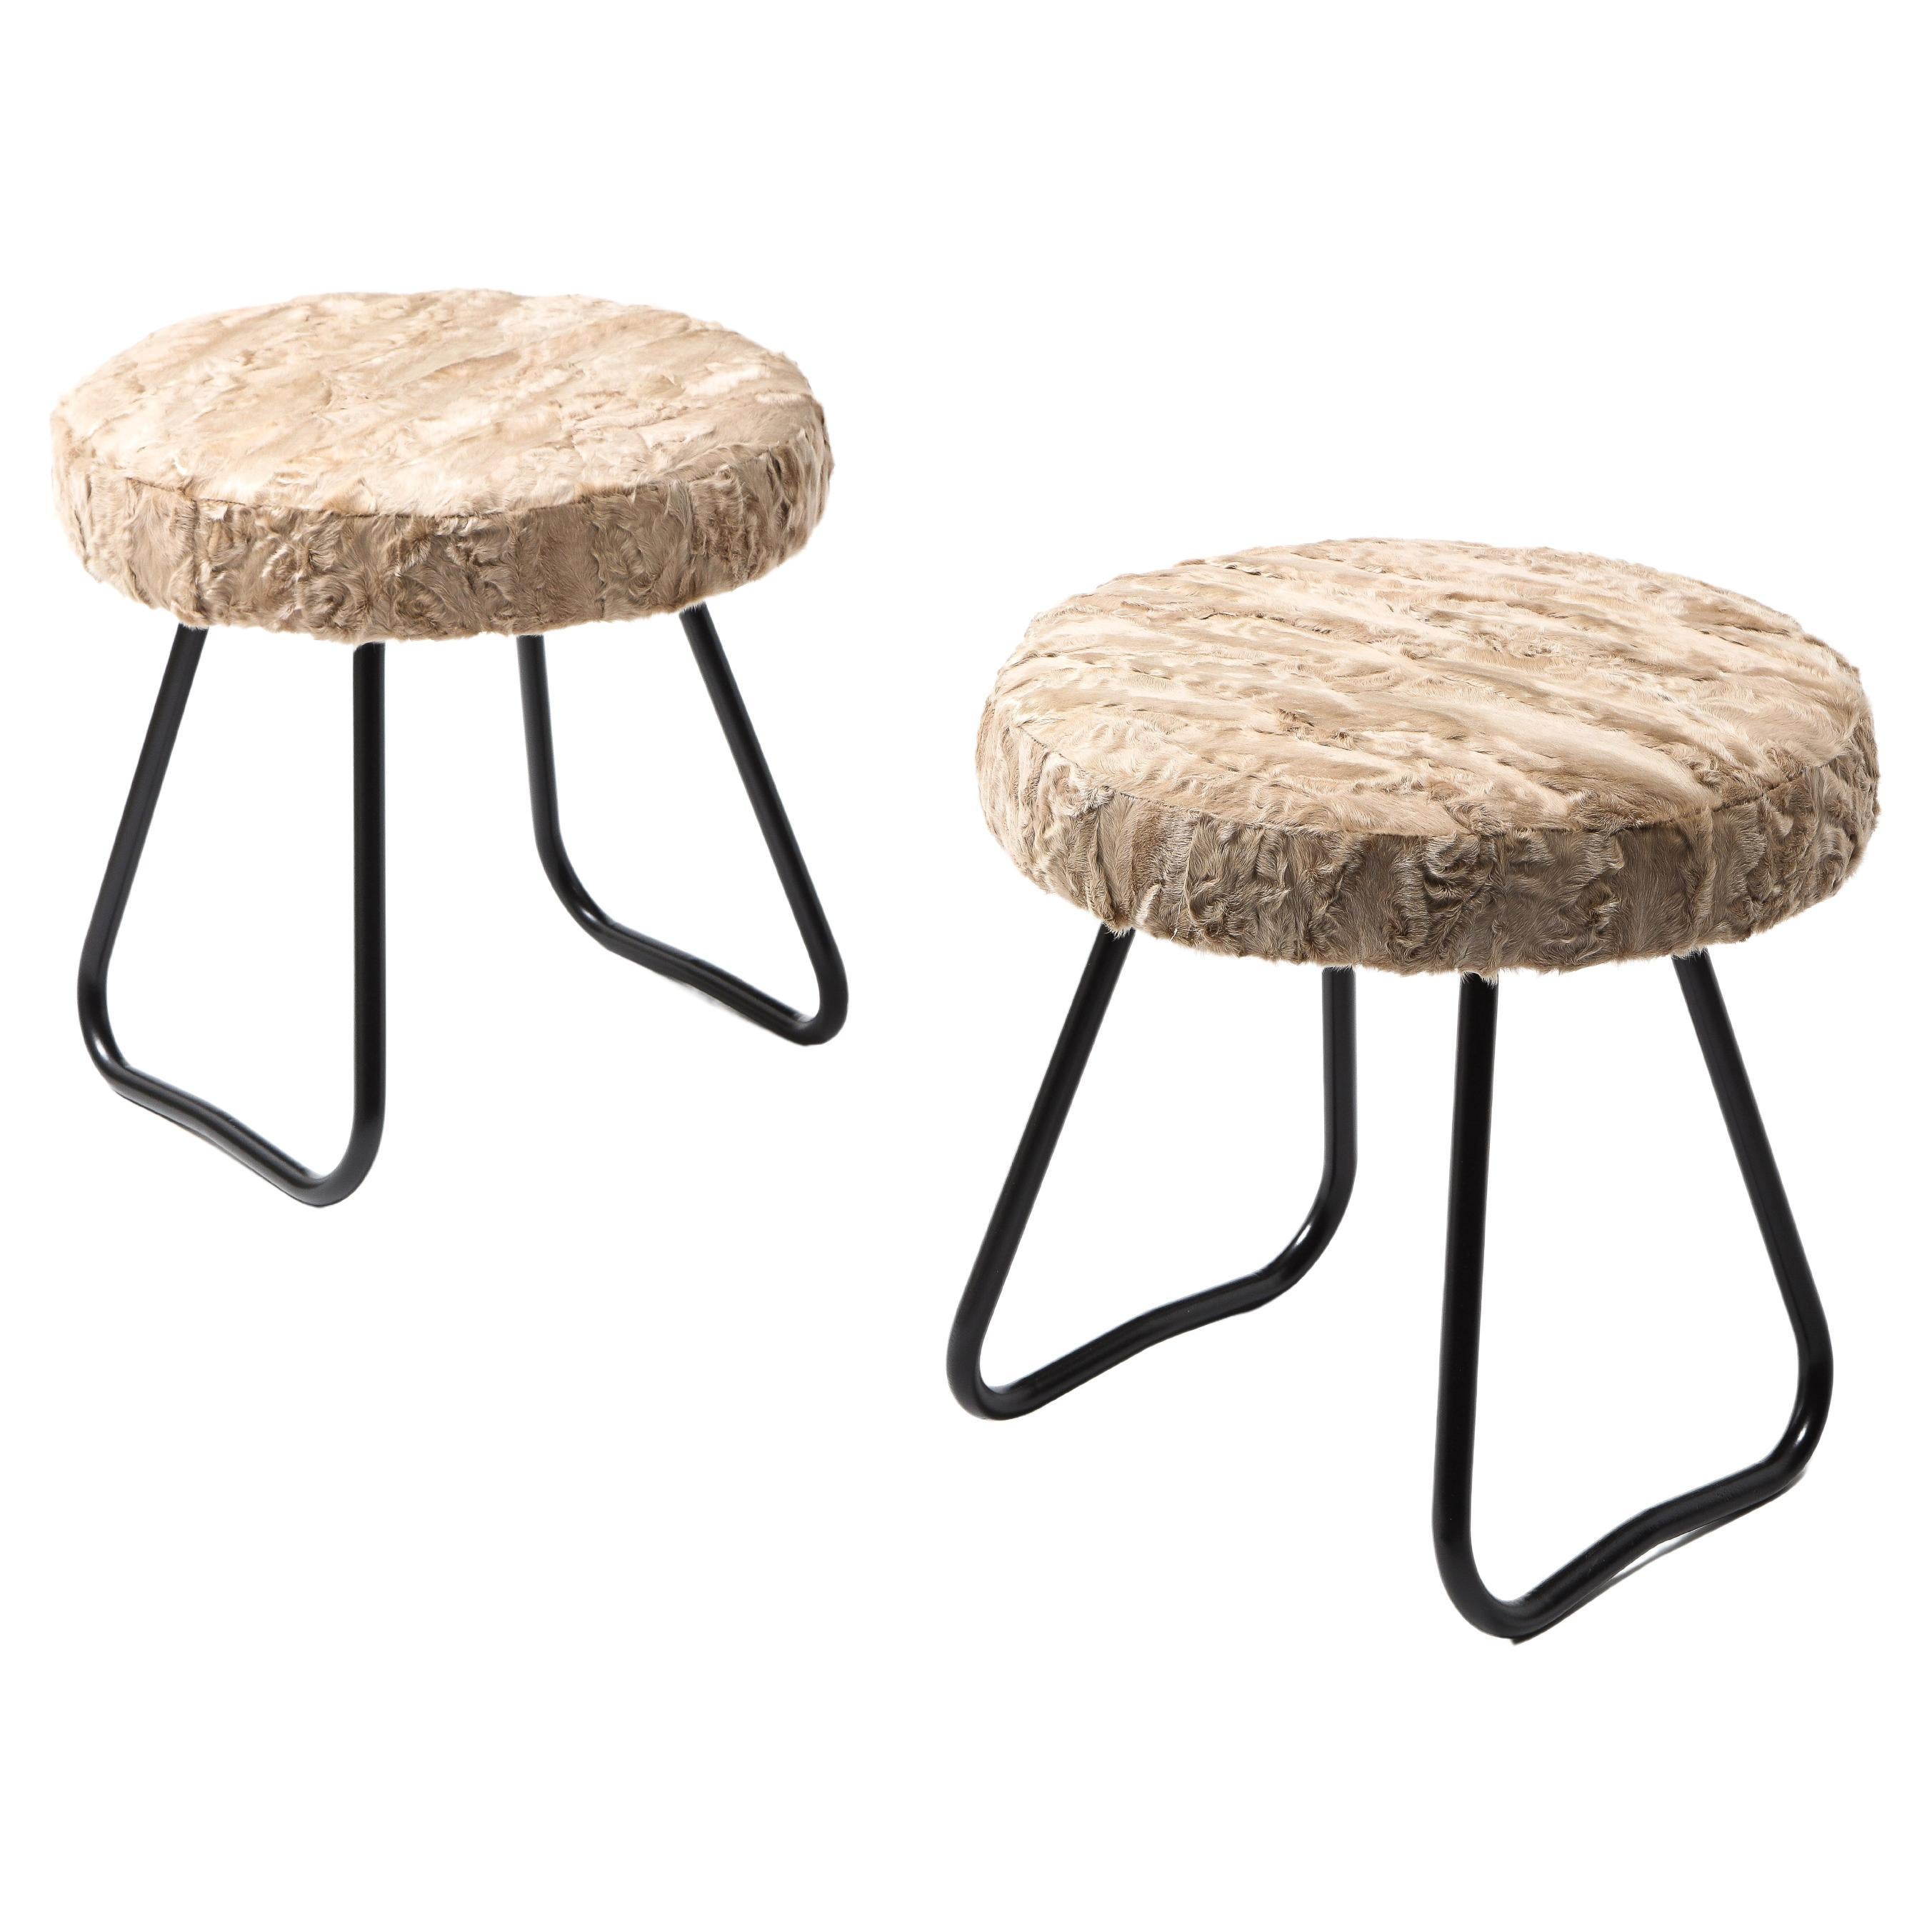 Pair of Tubular Steel Stools, France 1960's For Sale